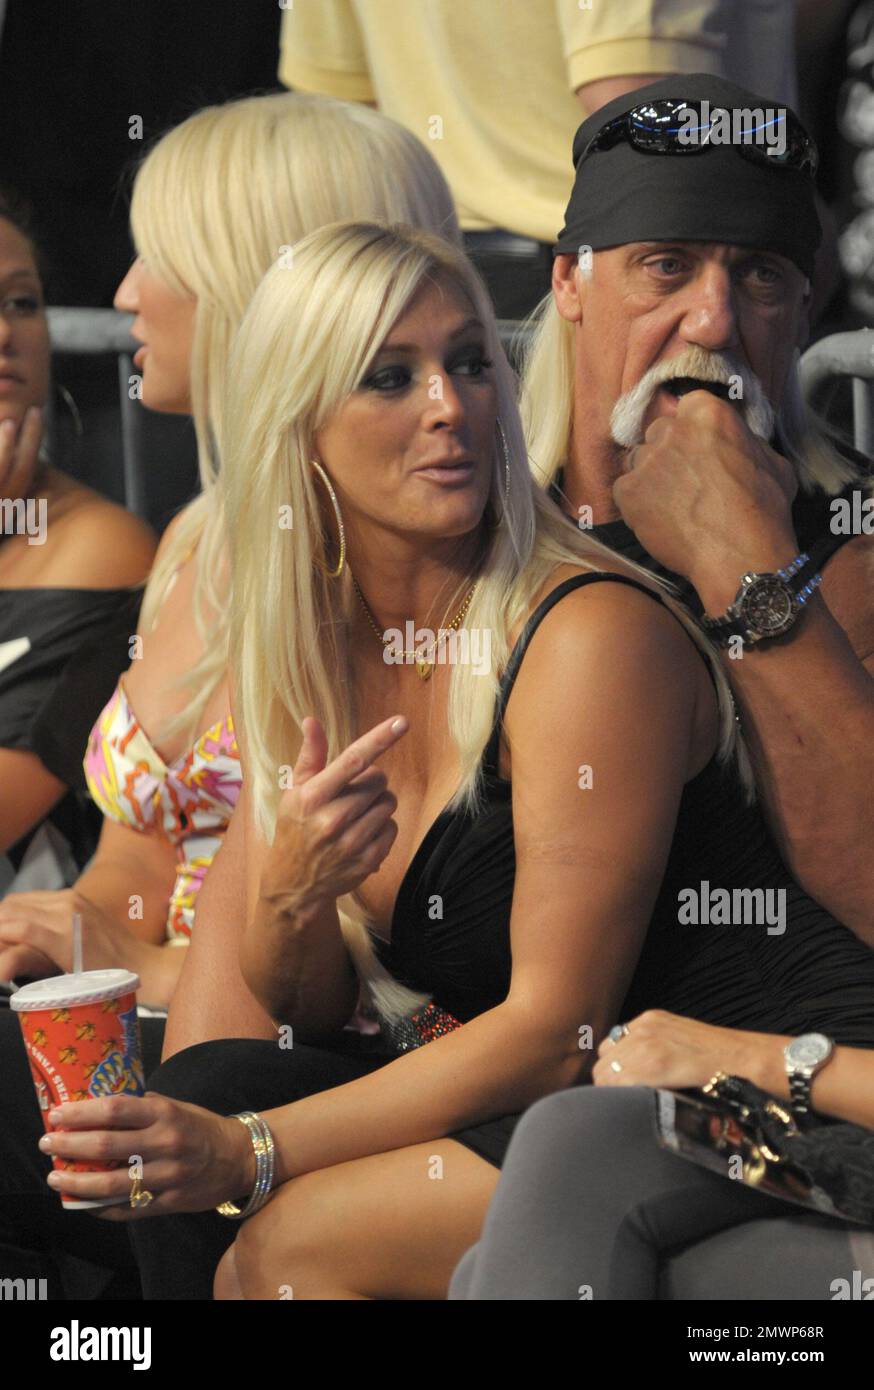 SUNRISE - FL - OCTOBER 04: (EXCLUSIVE COVERAGE) is the Hulk AKA Terry Gene Bollea engaged to girlfriend Jennifer McDaniel? Jennifer was seen sporting what looked like a huge engagement ring at the Kimbo Slaice mixed-martial-arts fight (Vancover Sun) Prior to Saturday night, only the most hardcore mixed-martial-arts fans had any idea who Seth Petruzelli was. That all changed 14 seconds into his showdown with Kimbo Slice at Elite XC: Heat. Petruzelli (11-4), who was a last-minute replacement for MMA legend Ken Shamrock against Slice (3-1), took advantage of his opportunity of a lifetime. Just Stock Photo